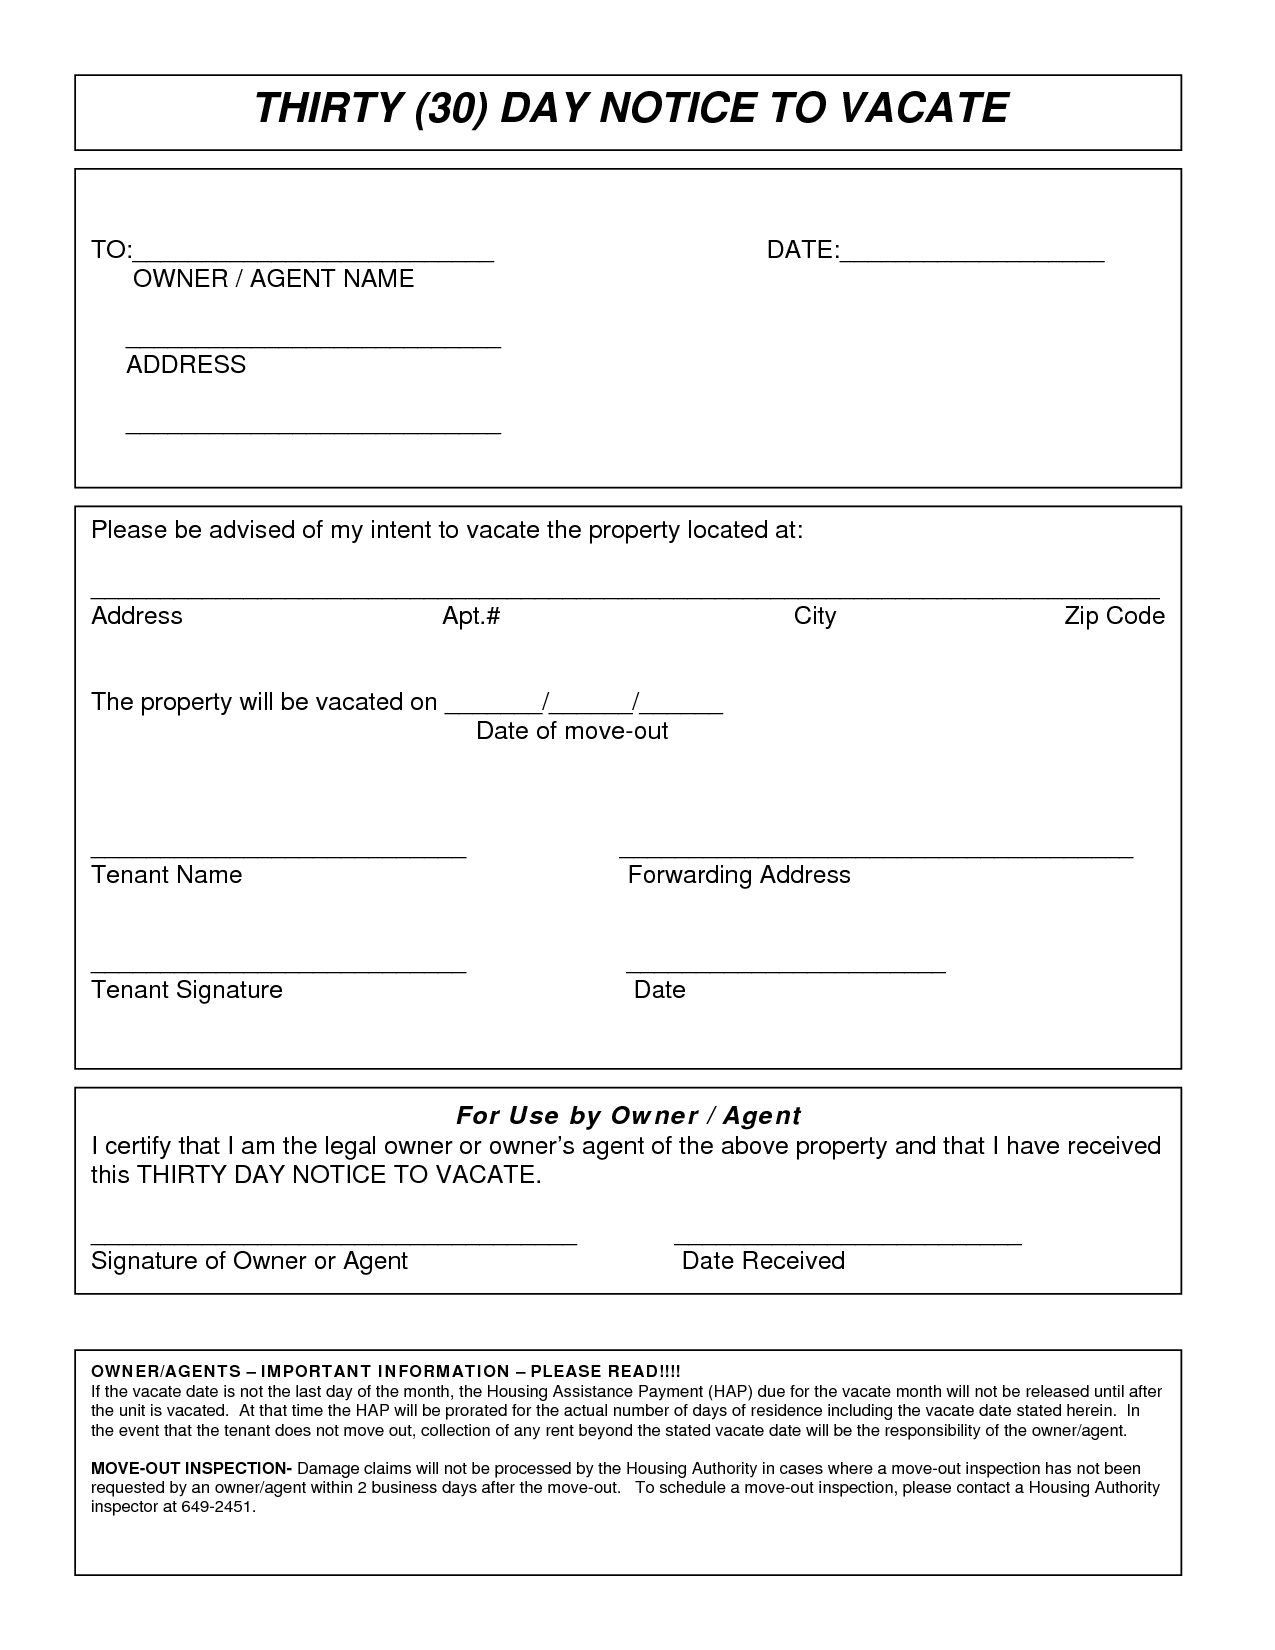 free-printable-30-day-notice-form-printable-forms-free-online